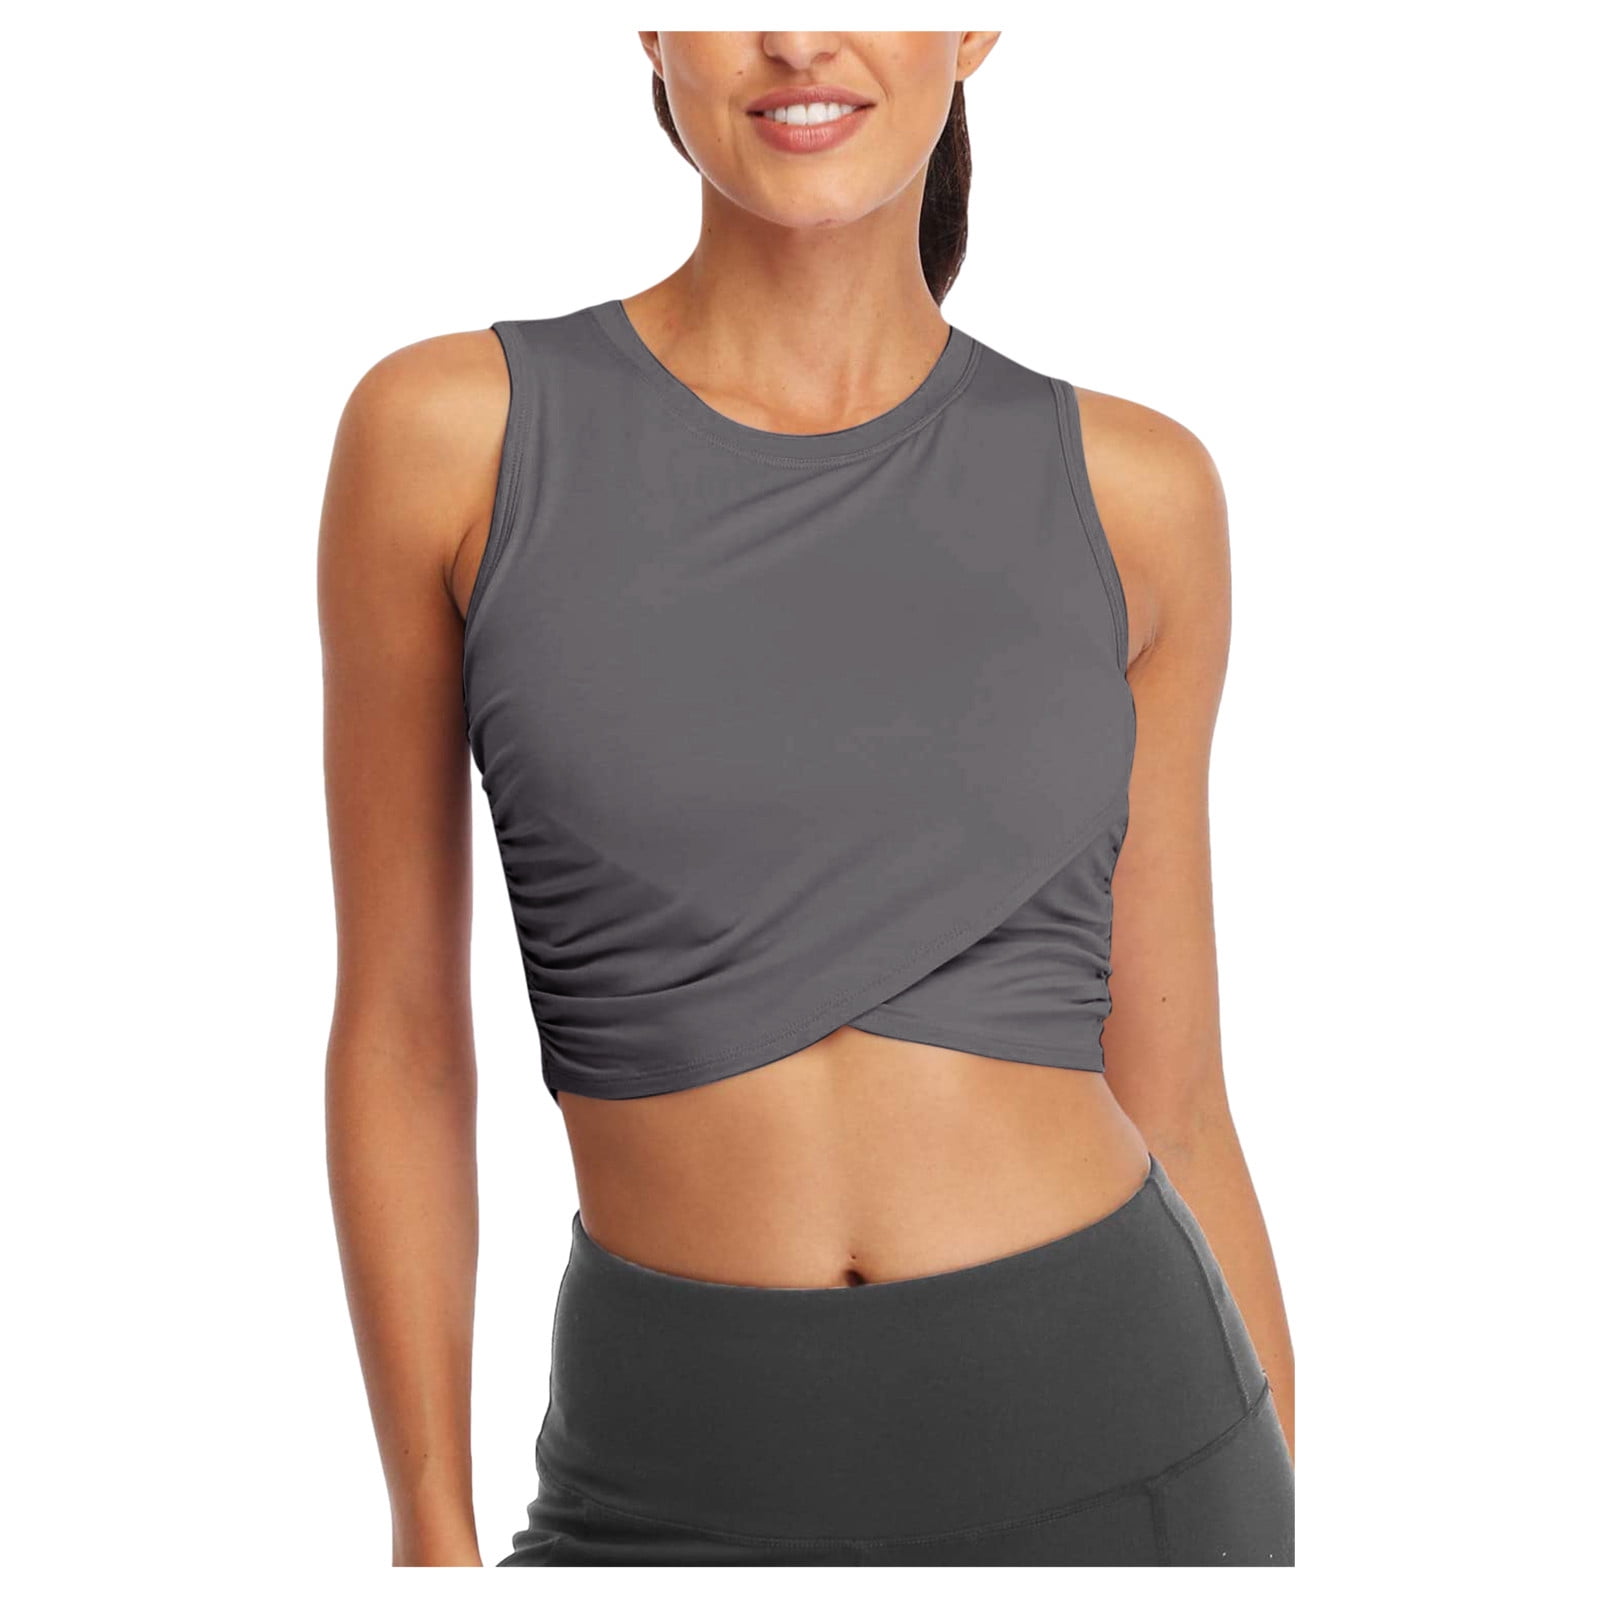 Sanutch Stretchy Long Sleeve Crop Top Sweatshirt Workout Tops for Women with Cut Off Hem